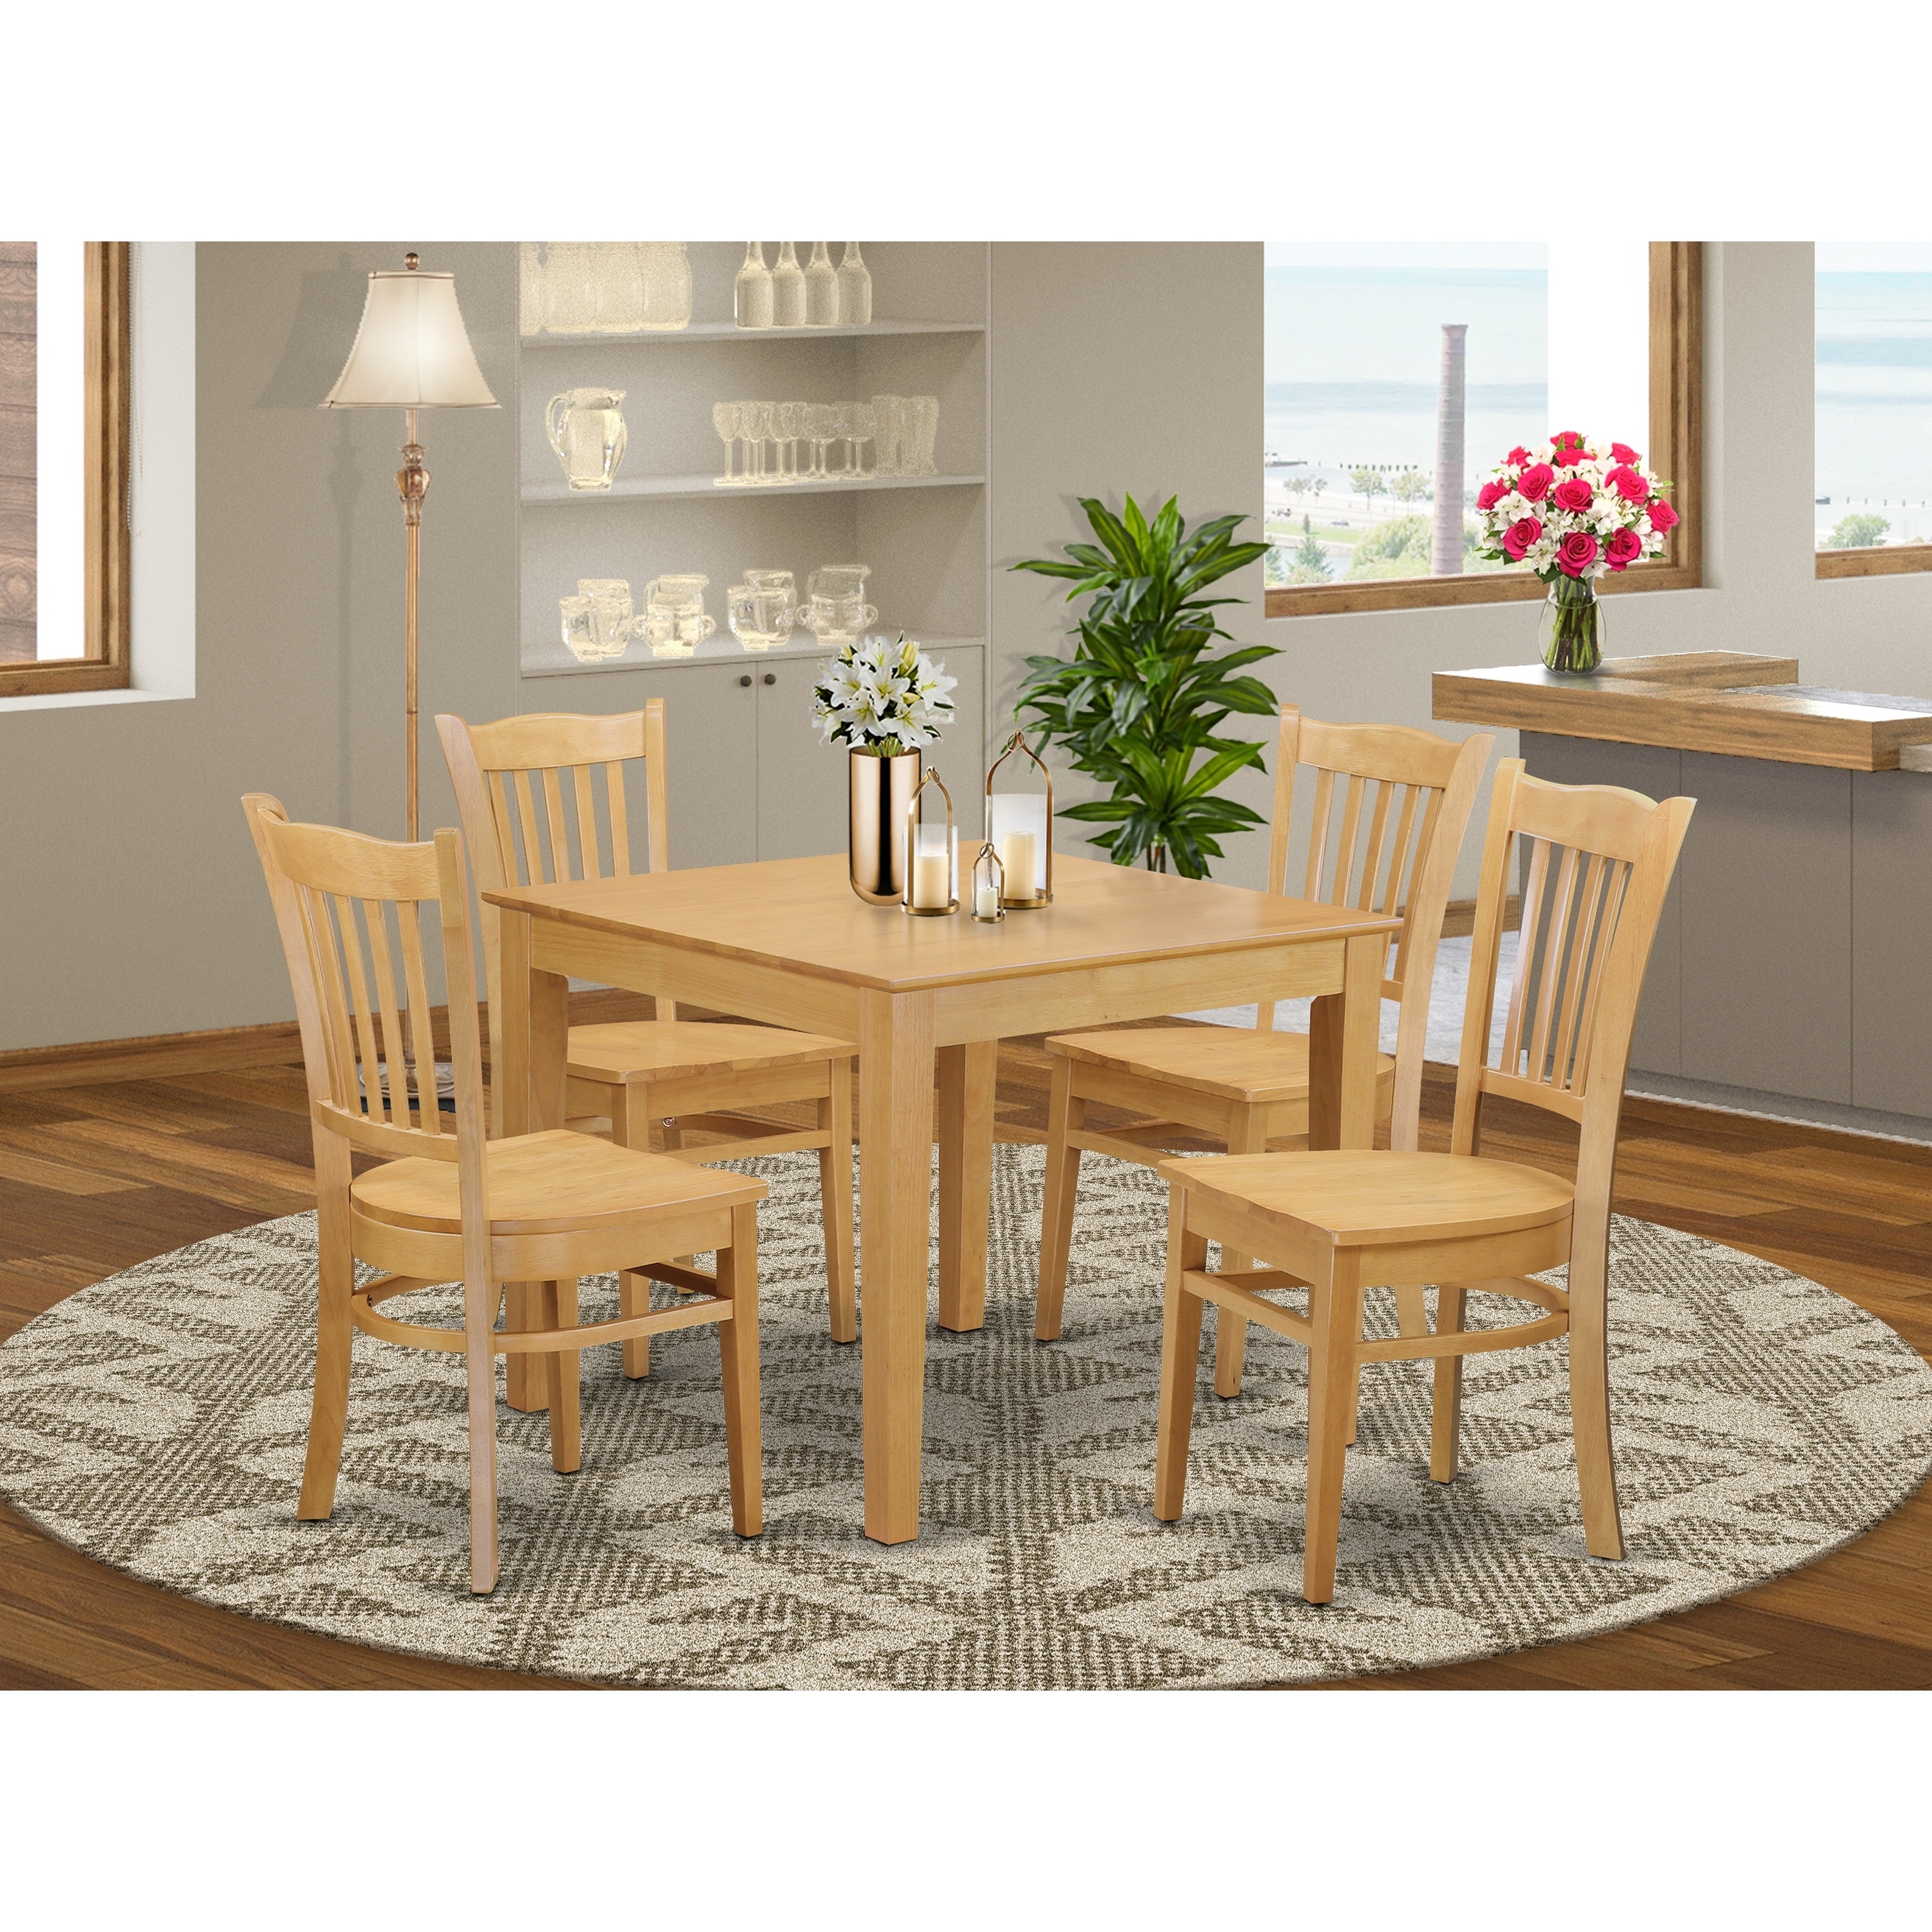 East West Furniture Kitchen Table and Chairs Set